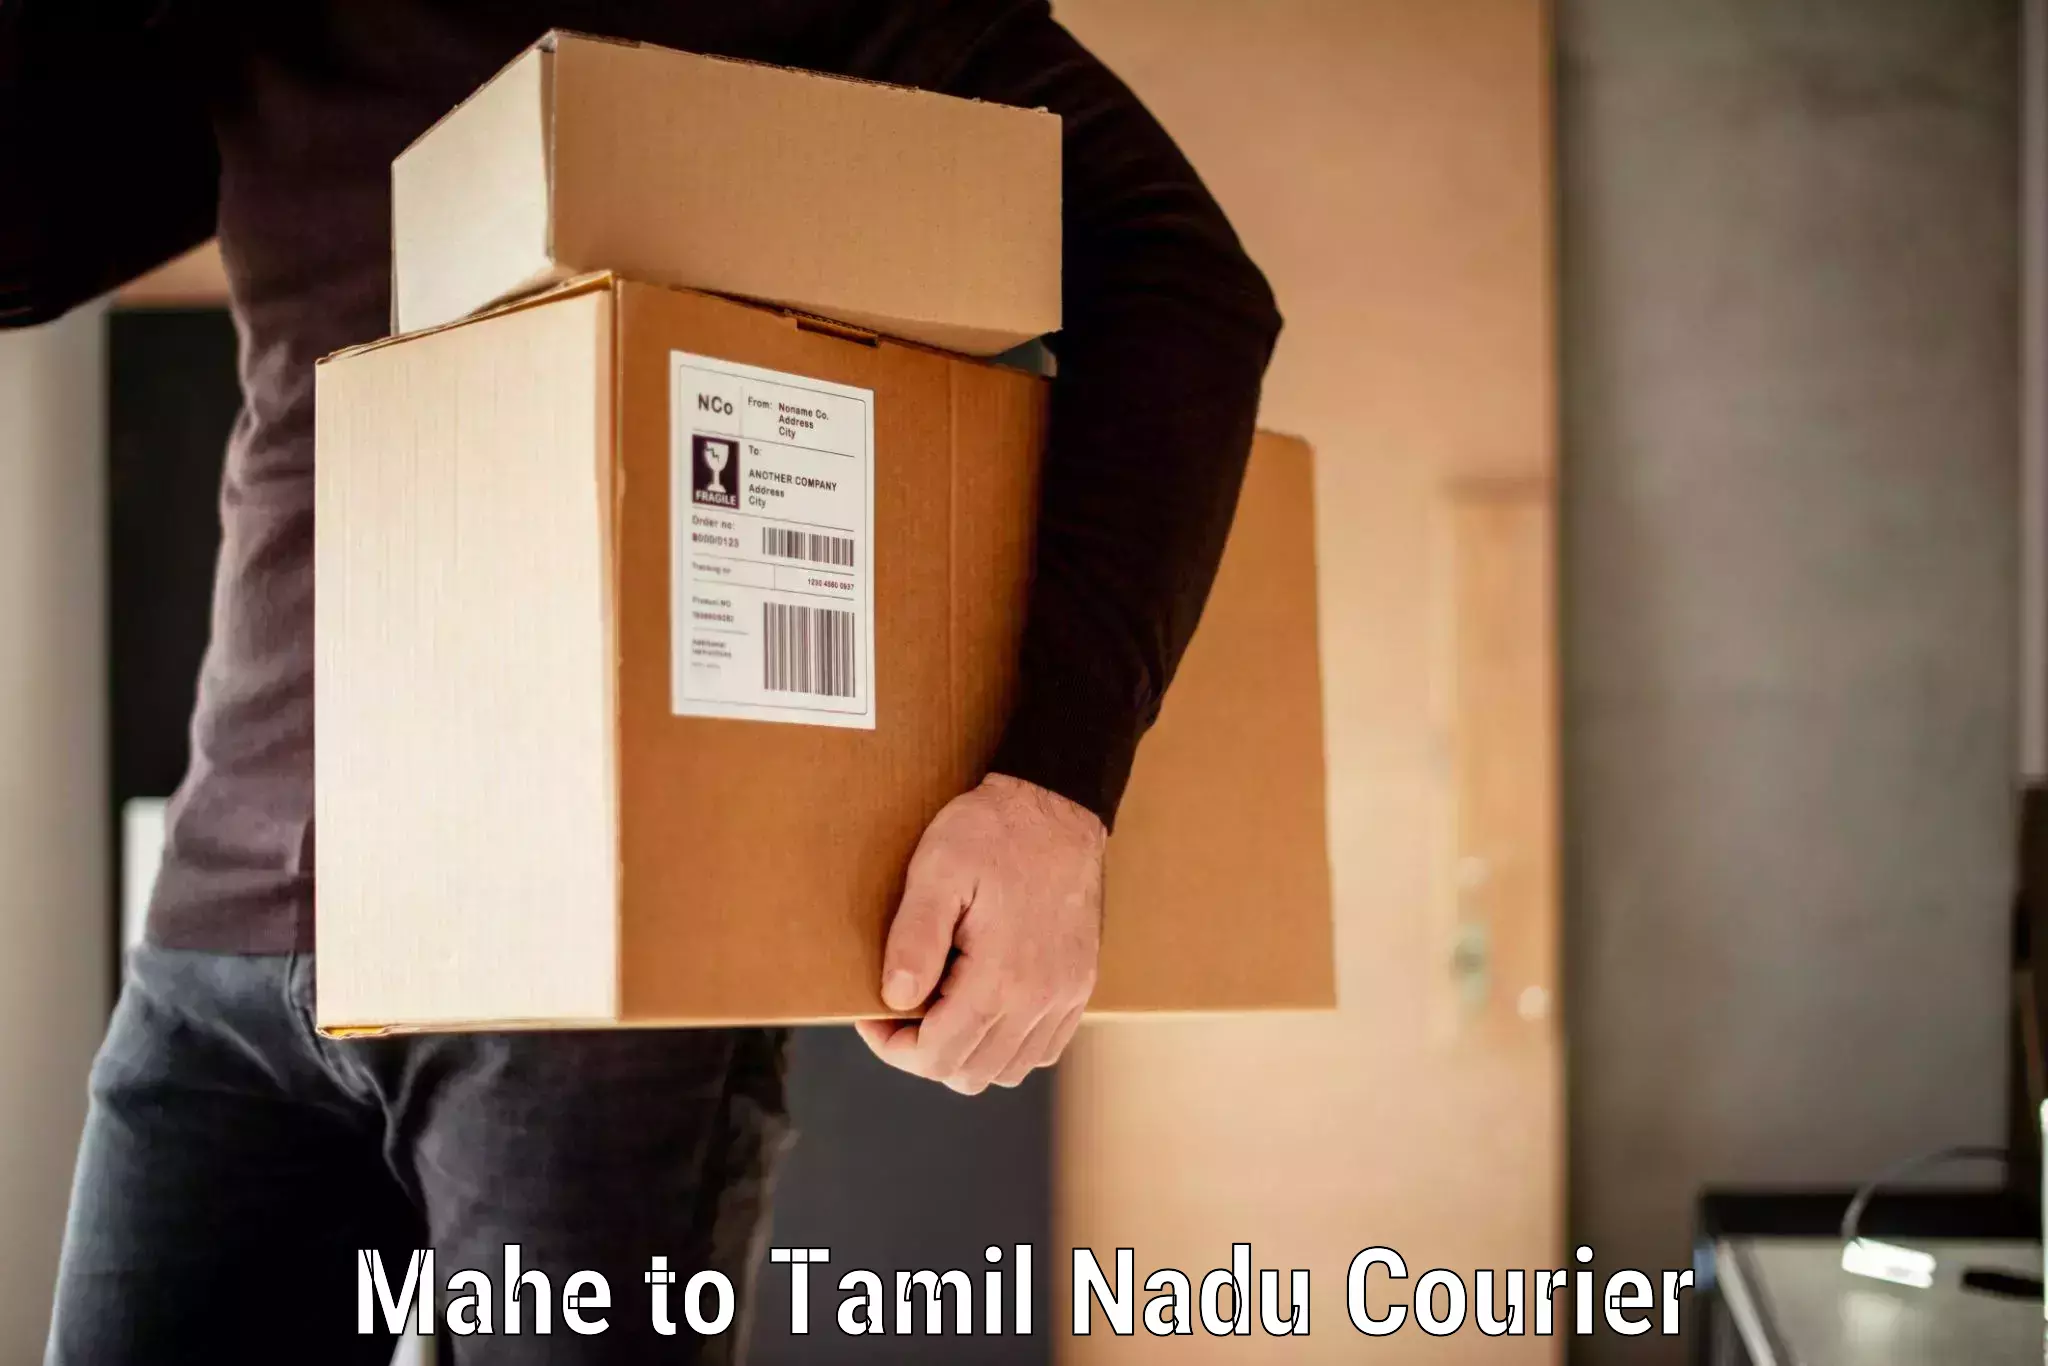 Luggage delivery network Mahe to Tamil Nadu